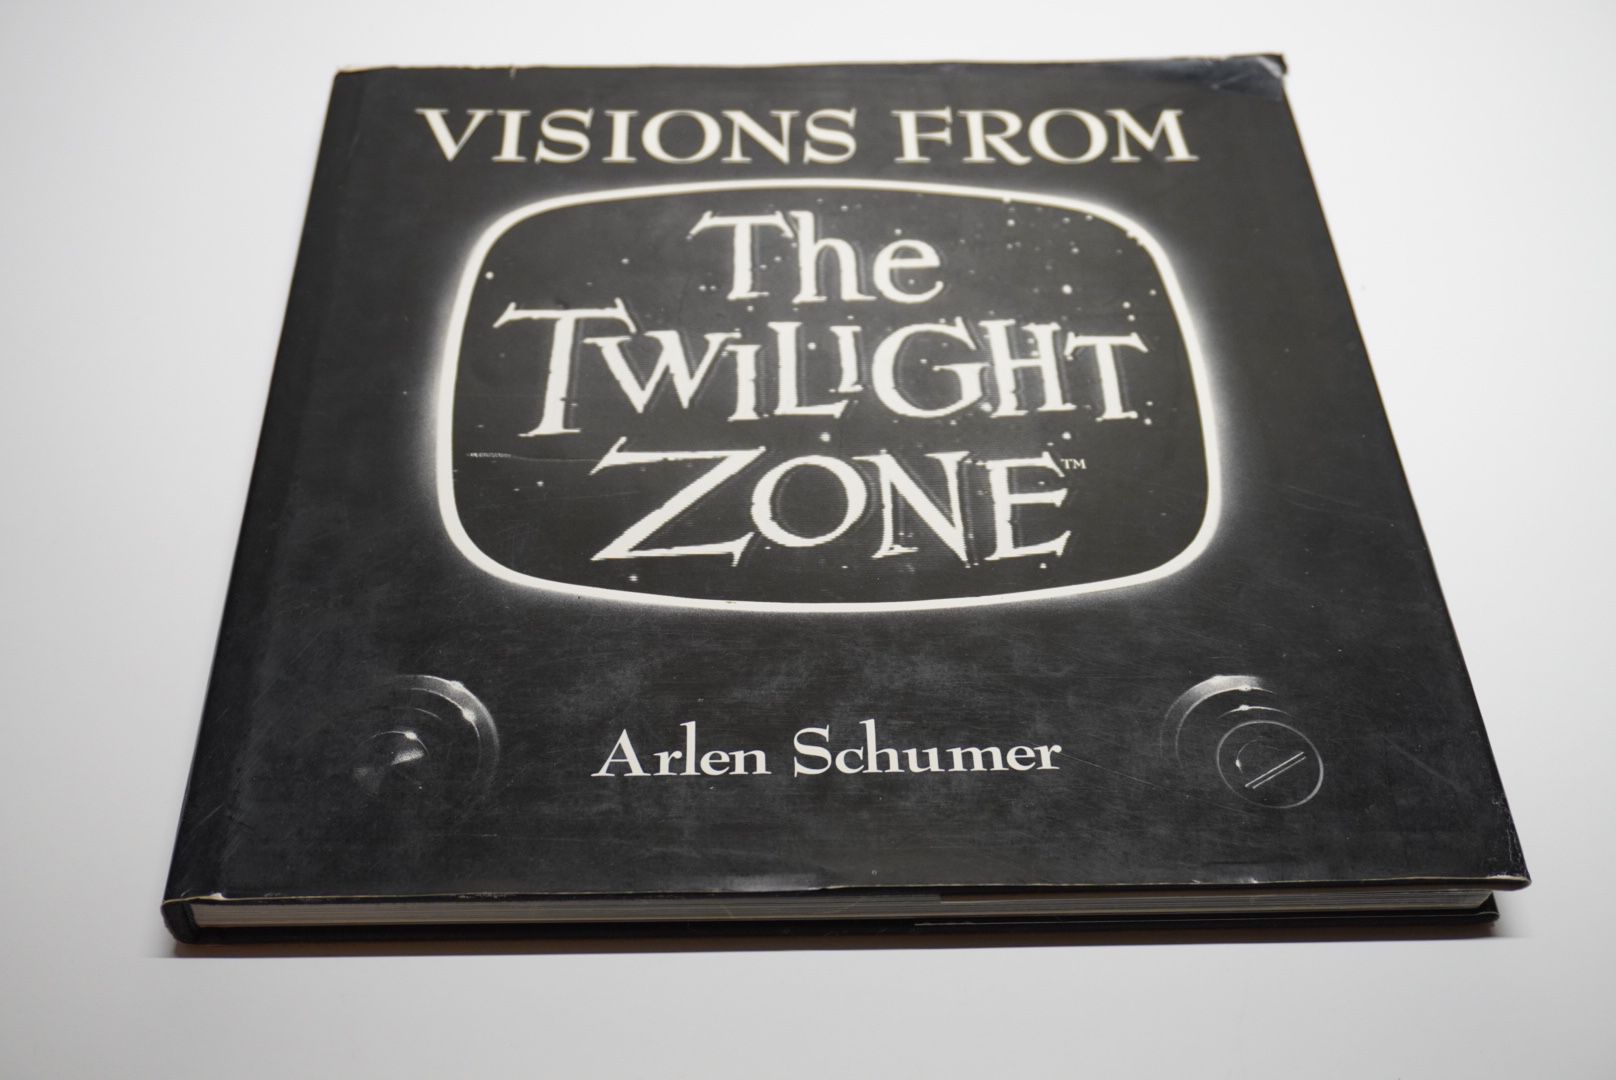 VISIONS FROM THE TWILIGHT ZONE BOOK - ARLEN SCHUMER!!-Hardcover